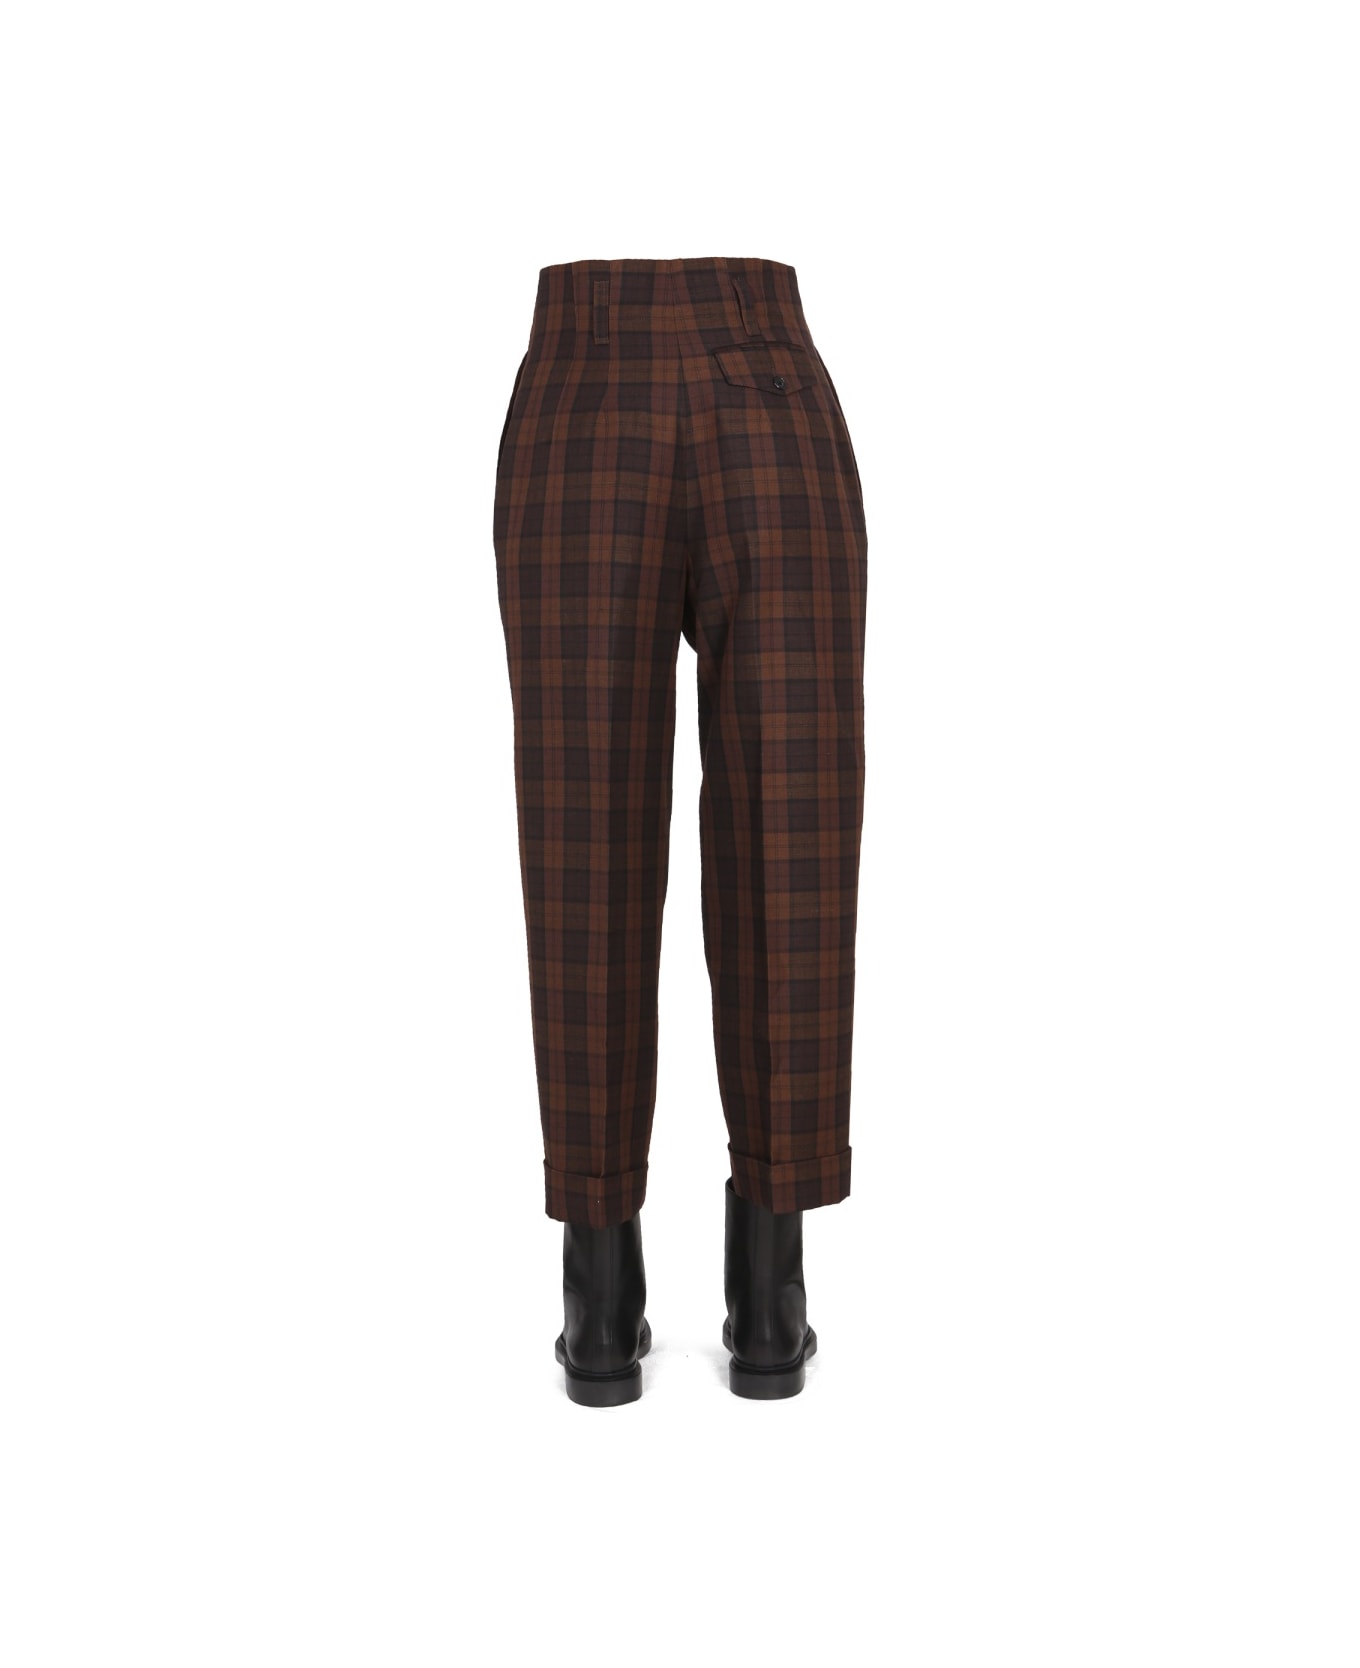 Margaret Howell Stitchpleatcrop Pants - BROWN